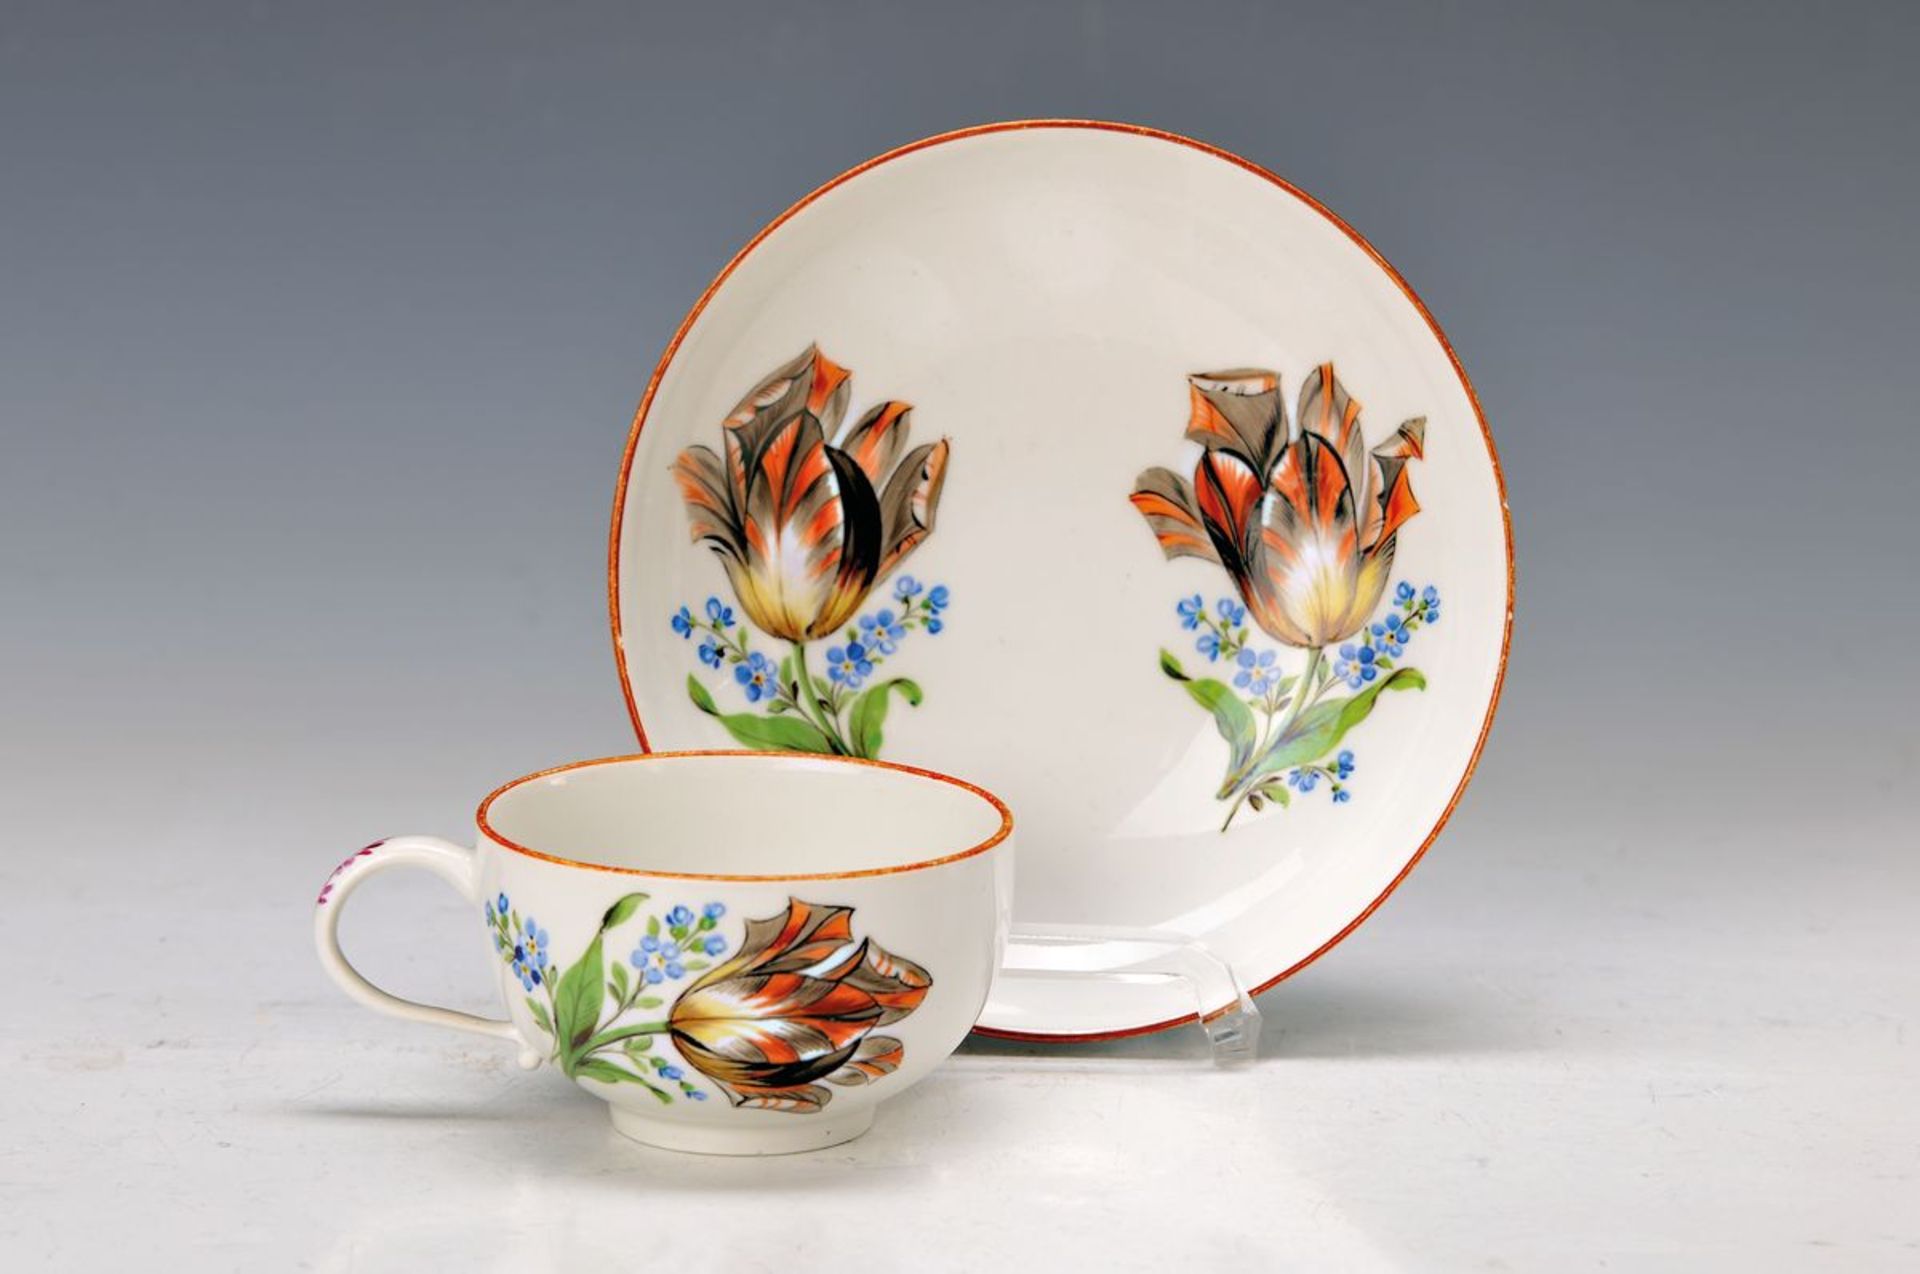 cup with saucer, Meissen, around 1885, Marcolini period, porcelain, colorful flowers with shadows,